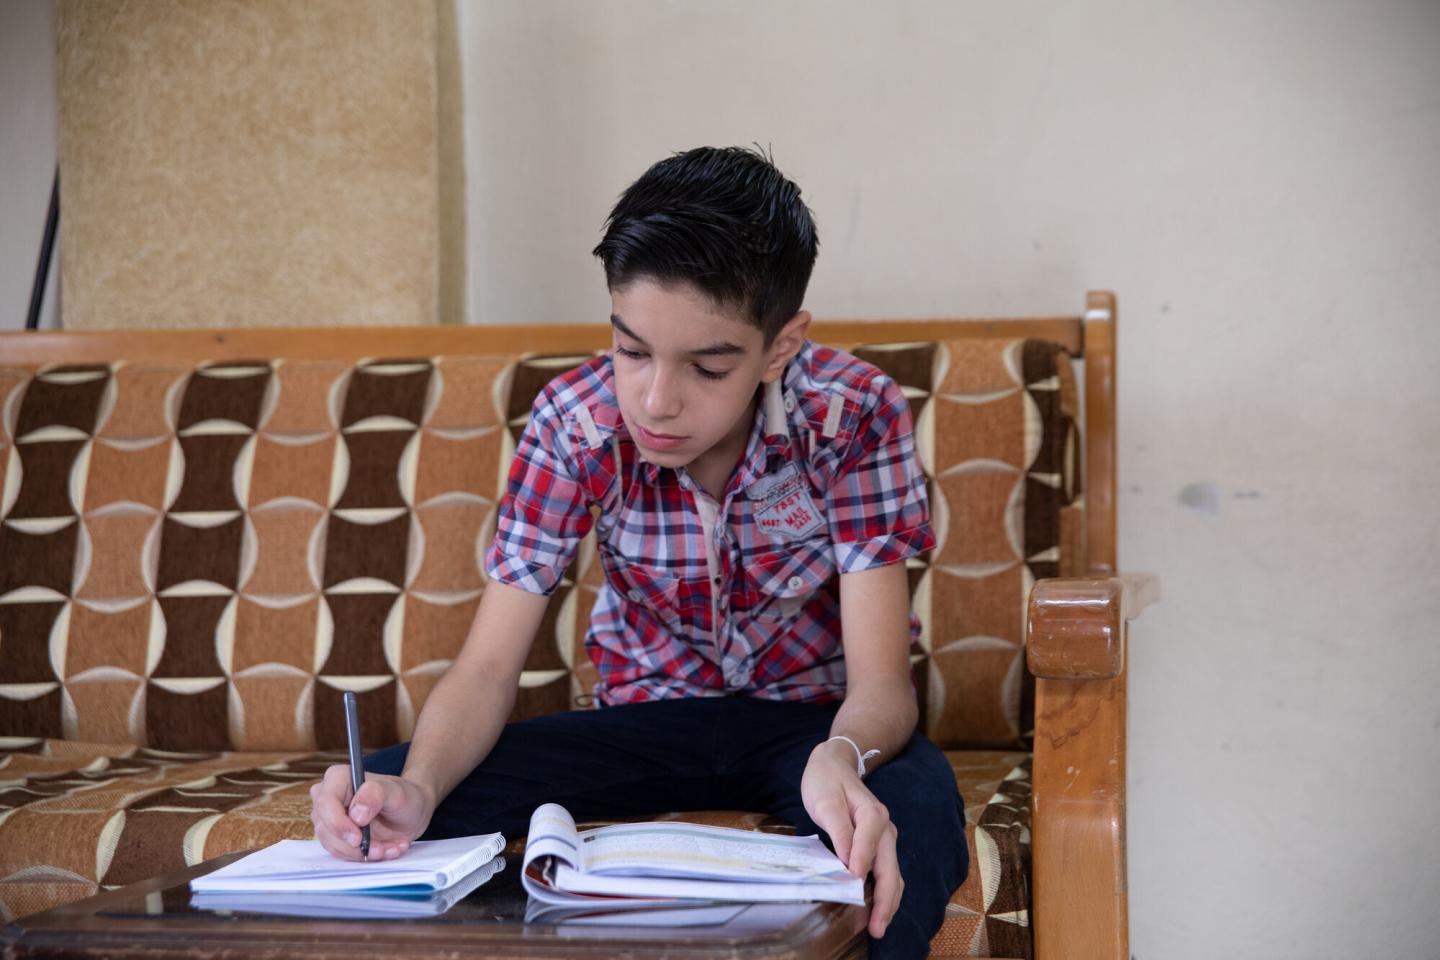 A Syrian boy sits on a couch and leans over his school work